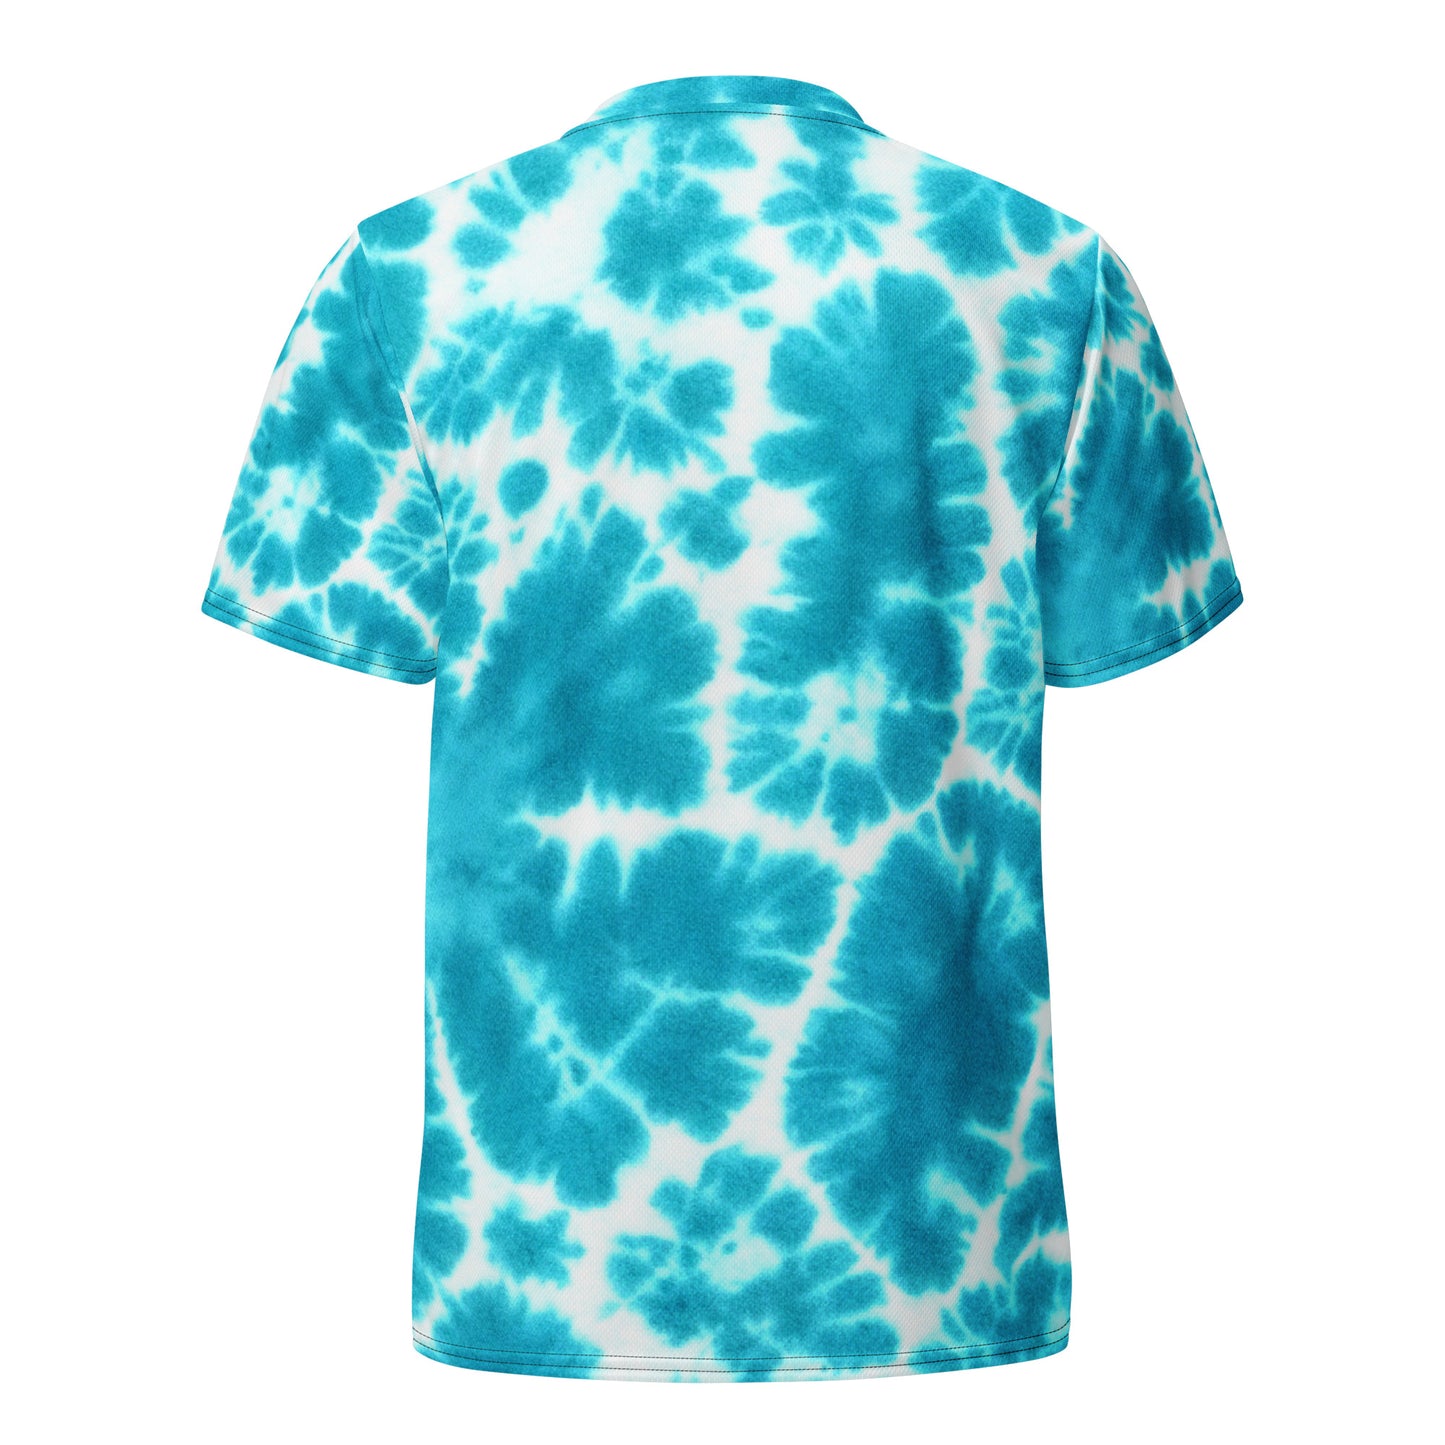 CPE NATIONALS  Recycled unisex sports jersey - tie dye